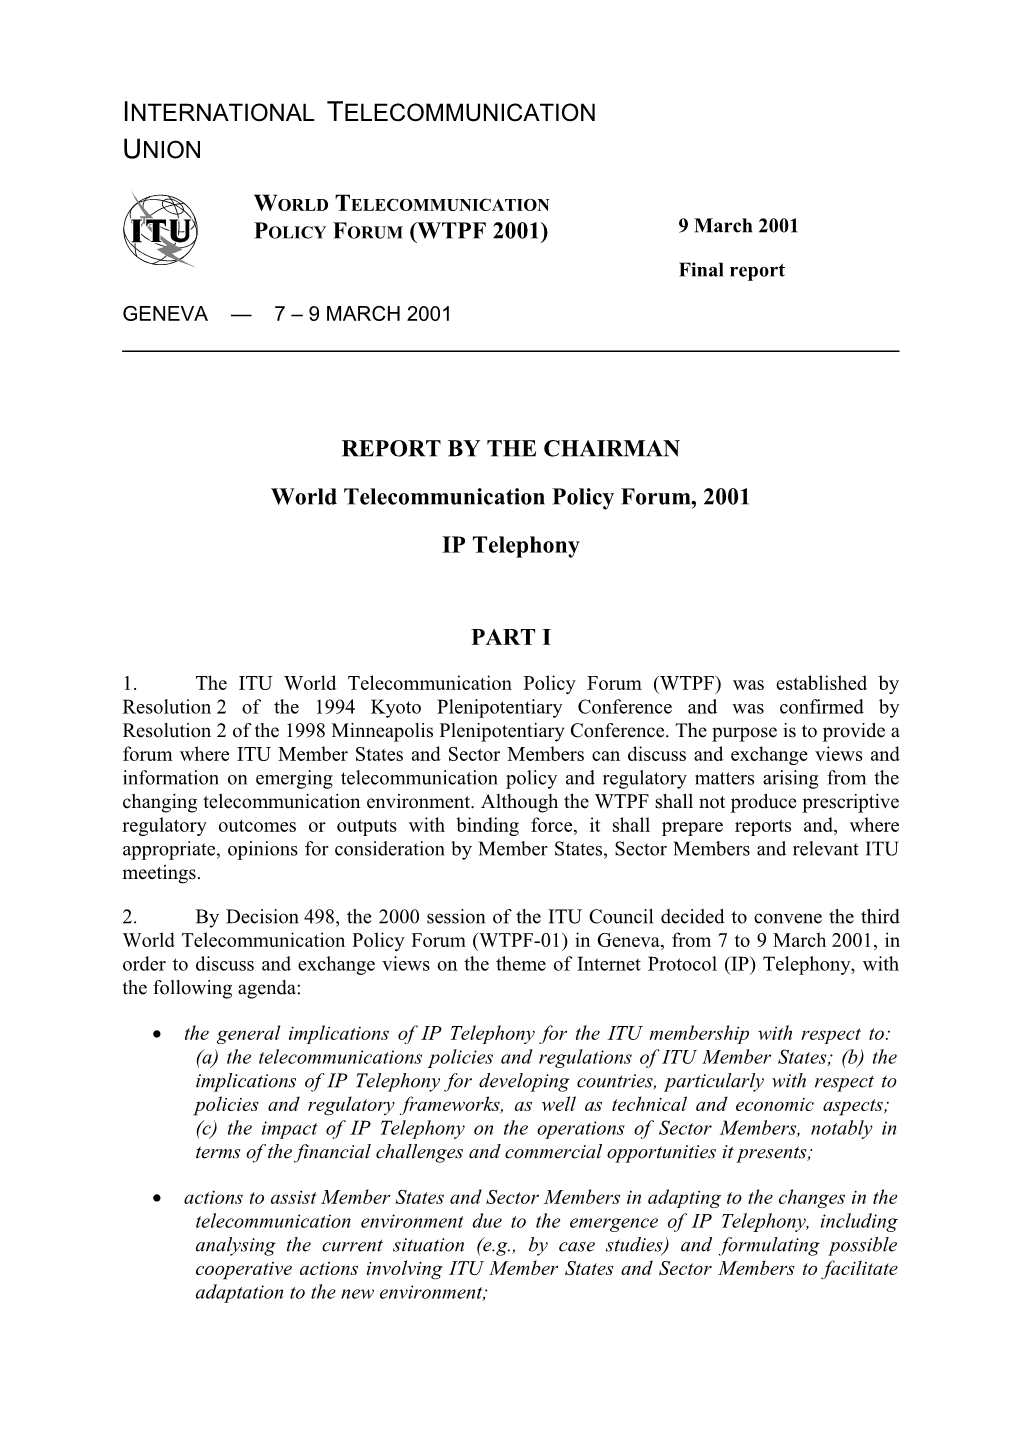 Final Report of the SG on IP Telephony